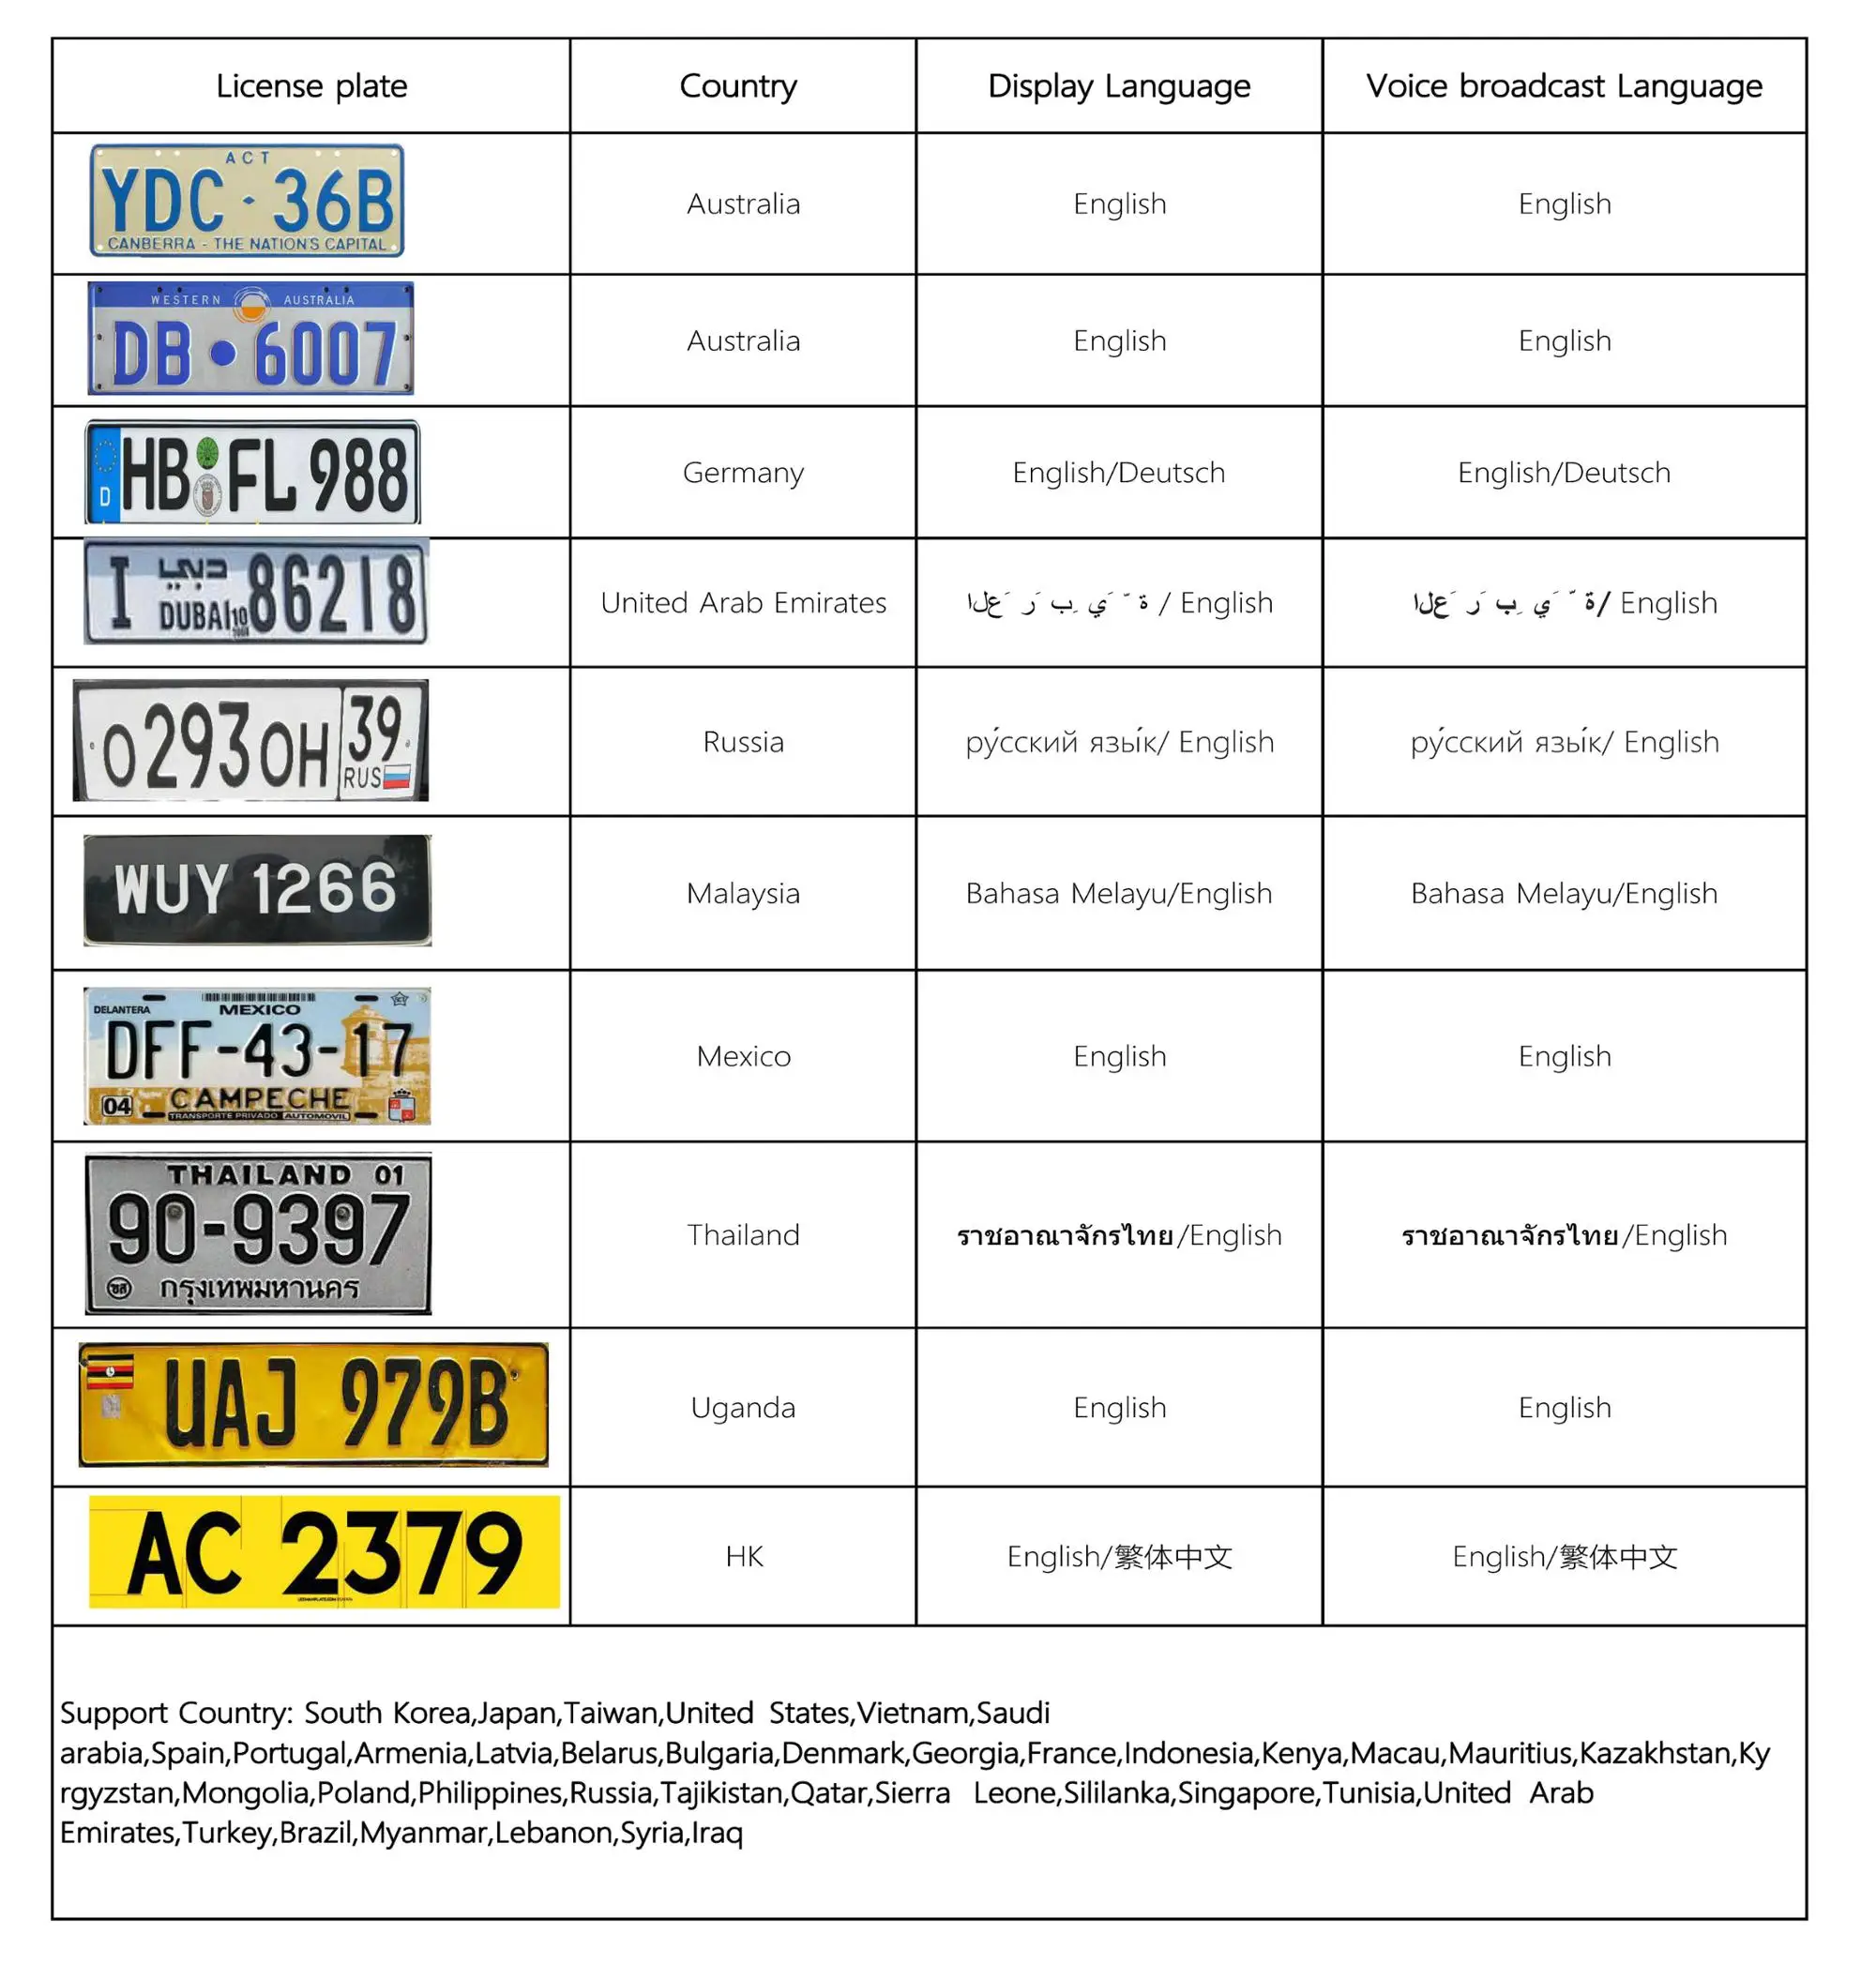 LPR / ANPR License plate recognition and Software with any language